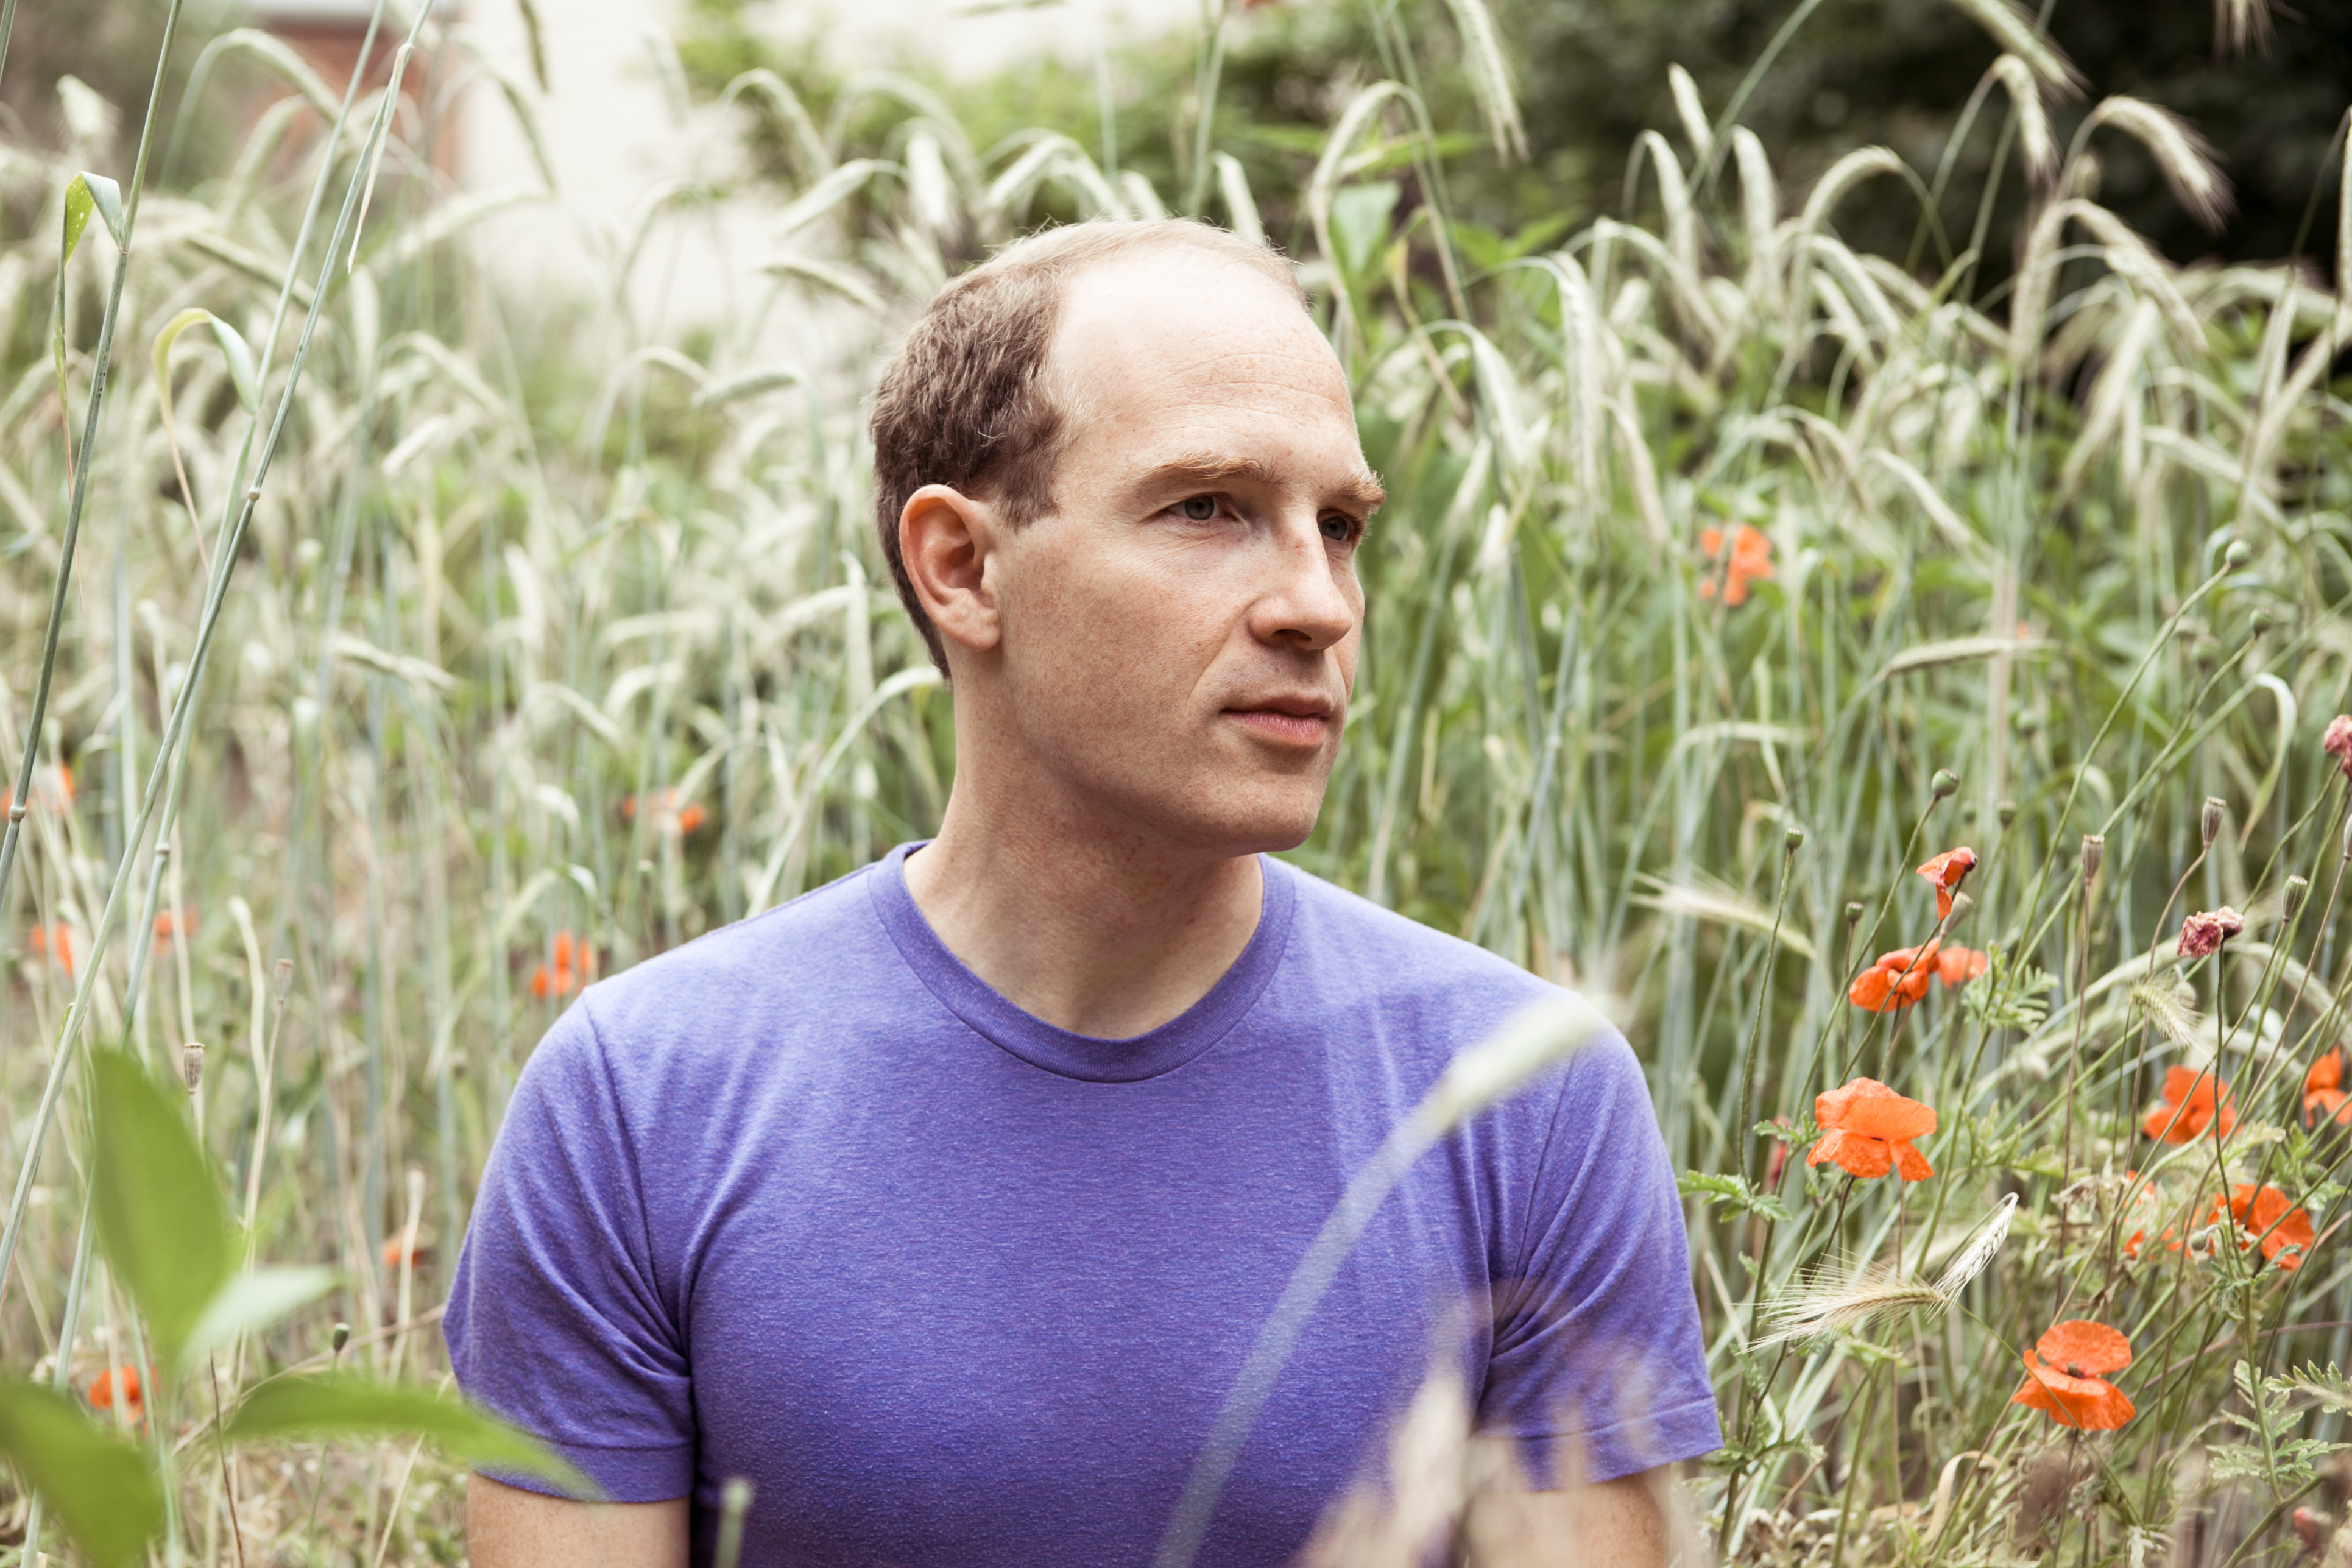 Caribou: “I make musically intuitively and emotionally, and never analytically”